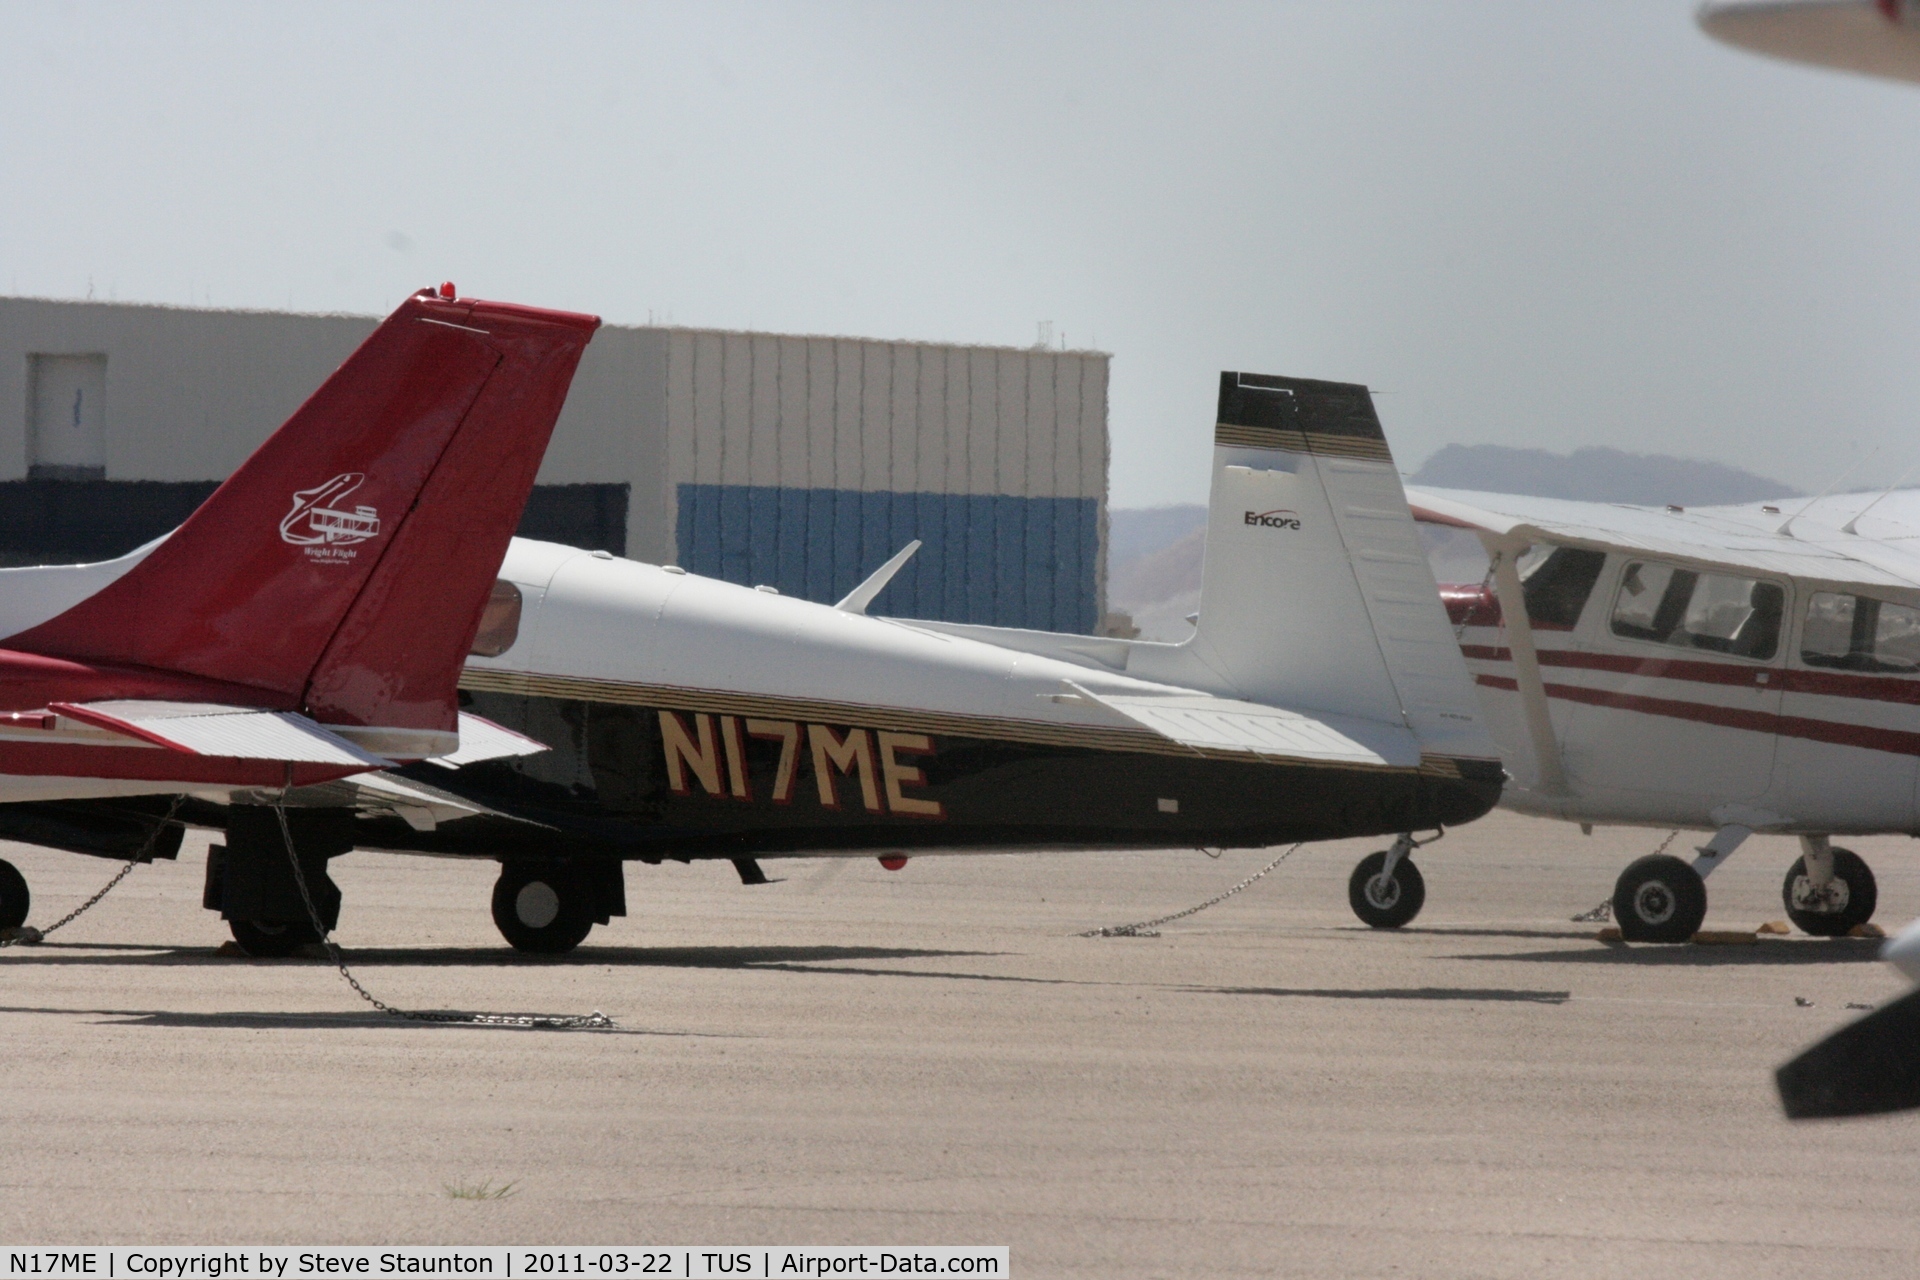 N17ME, 1997 Mooney M20K C/N 25-2006, Taken at Tucson International Airport, in March 2011 whilst on an Aeroprint Aviation tour